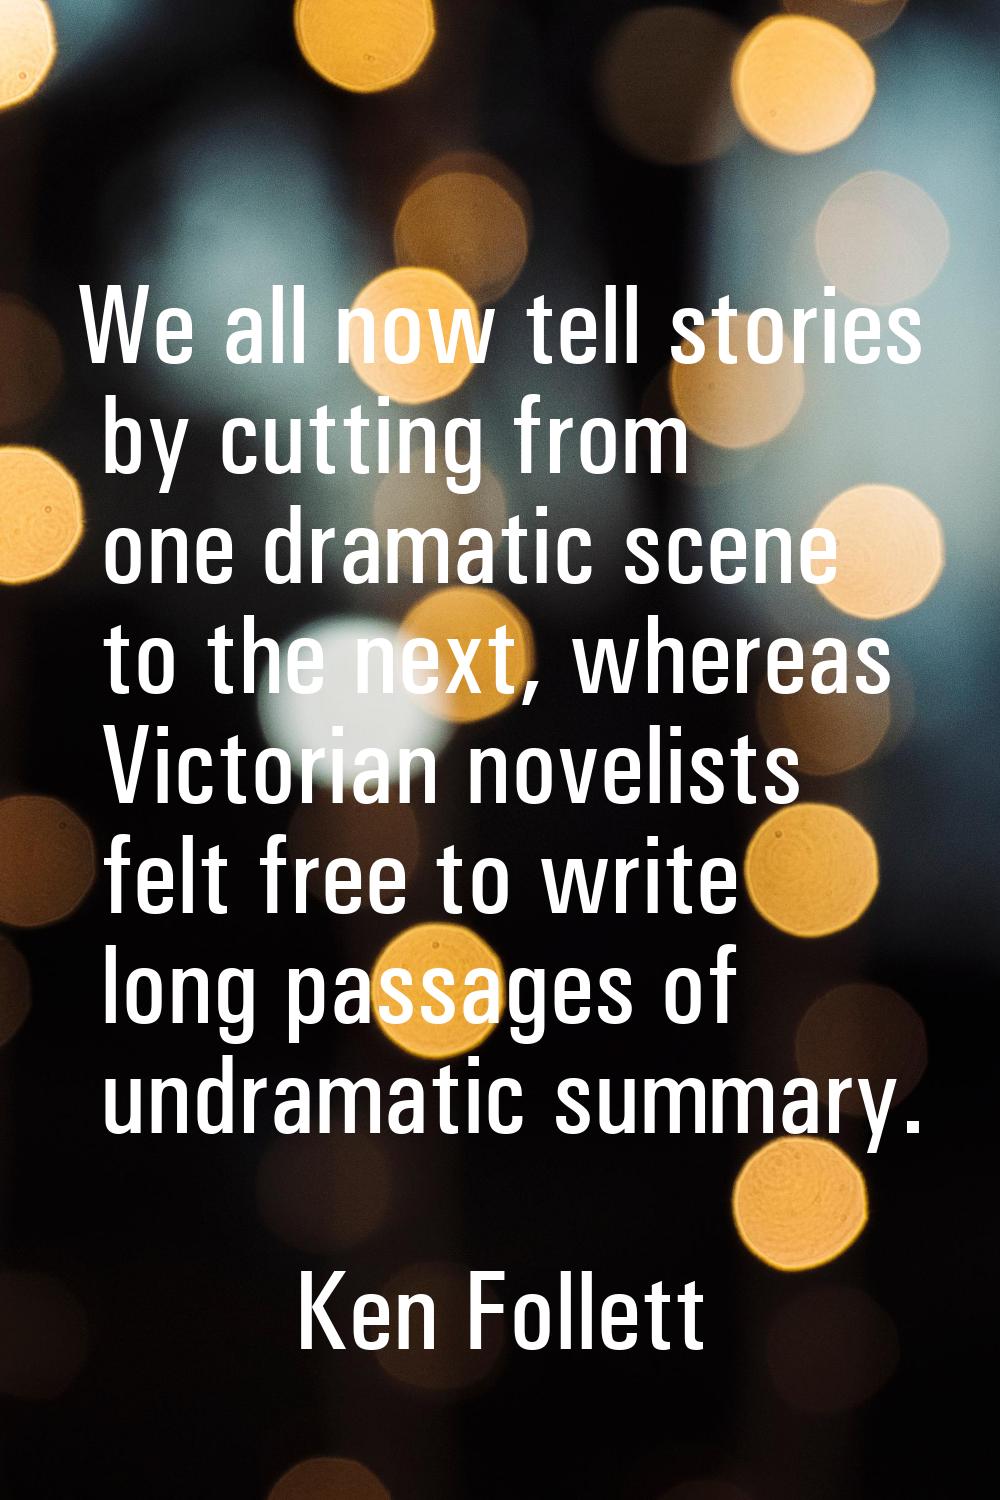 We all now tell stories by cutting from one dramatic scene to the next, whereas Victorian novelists